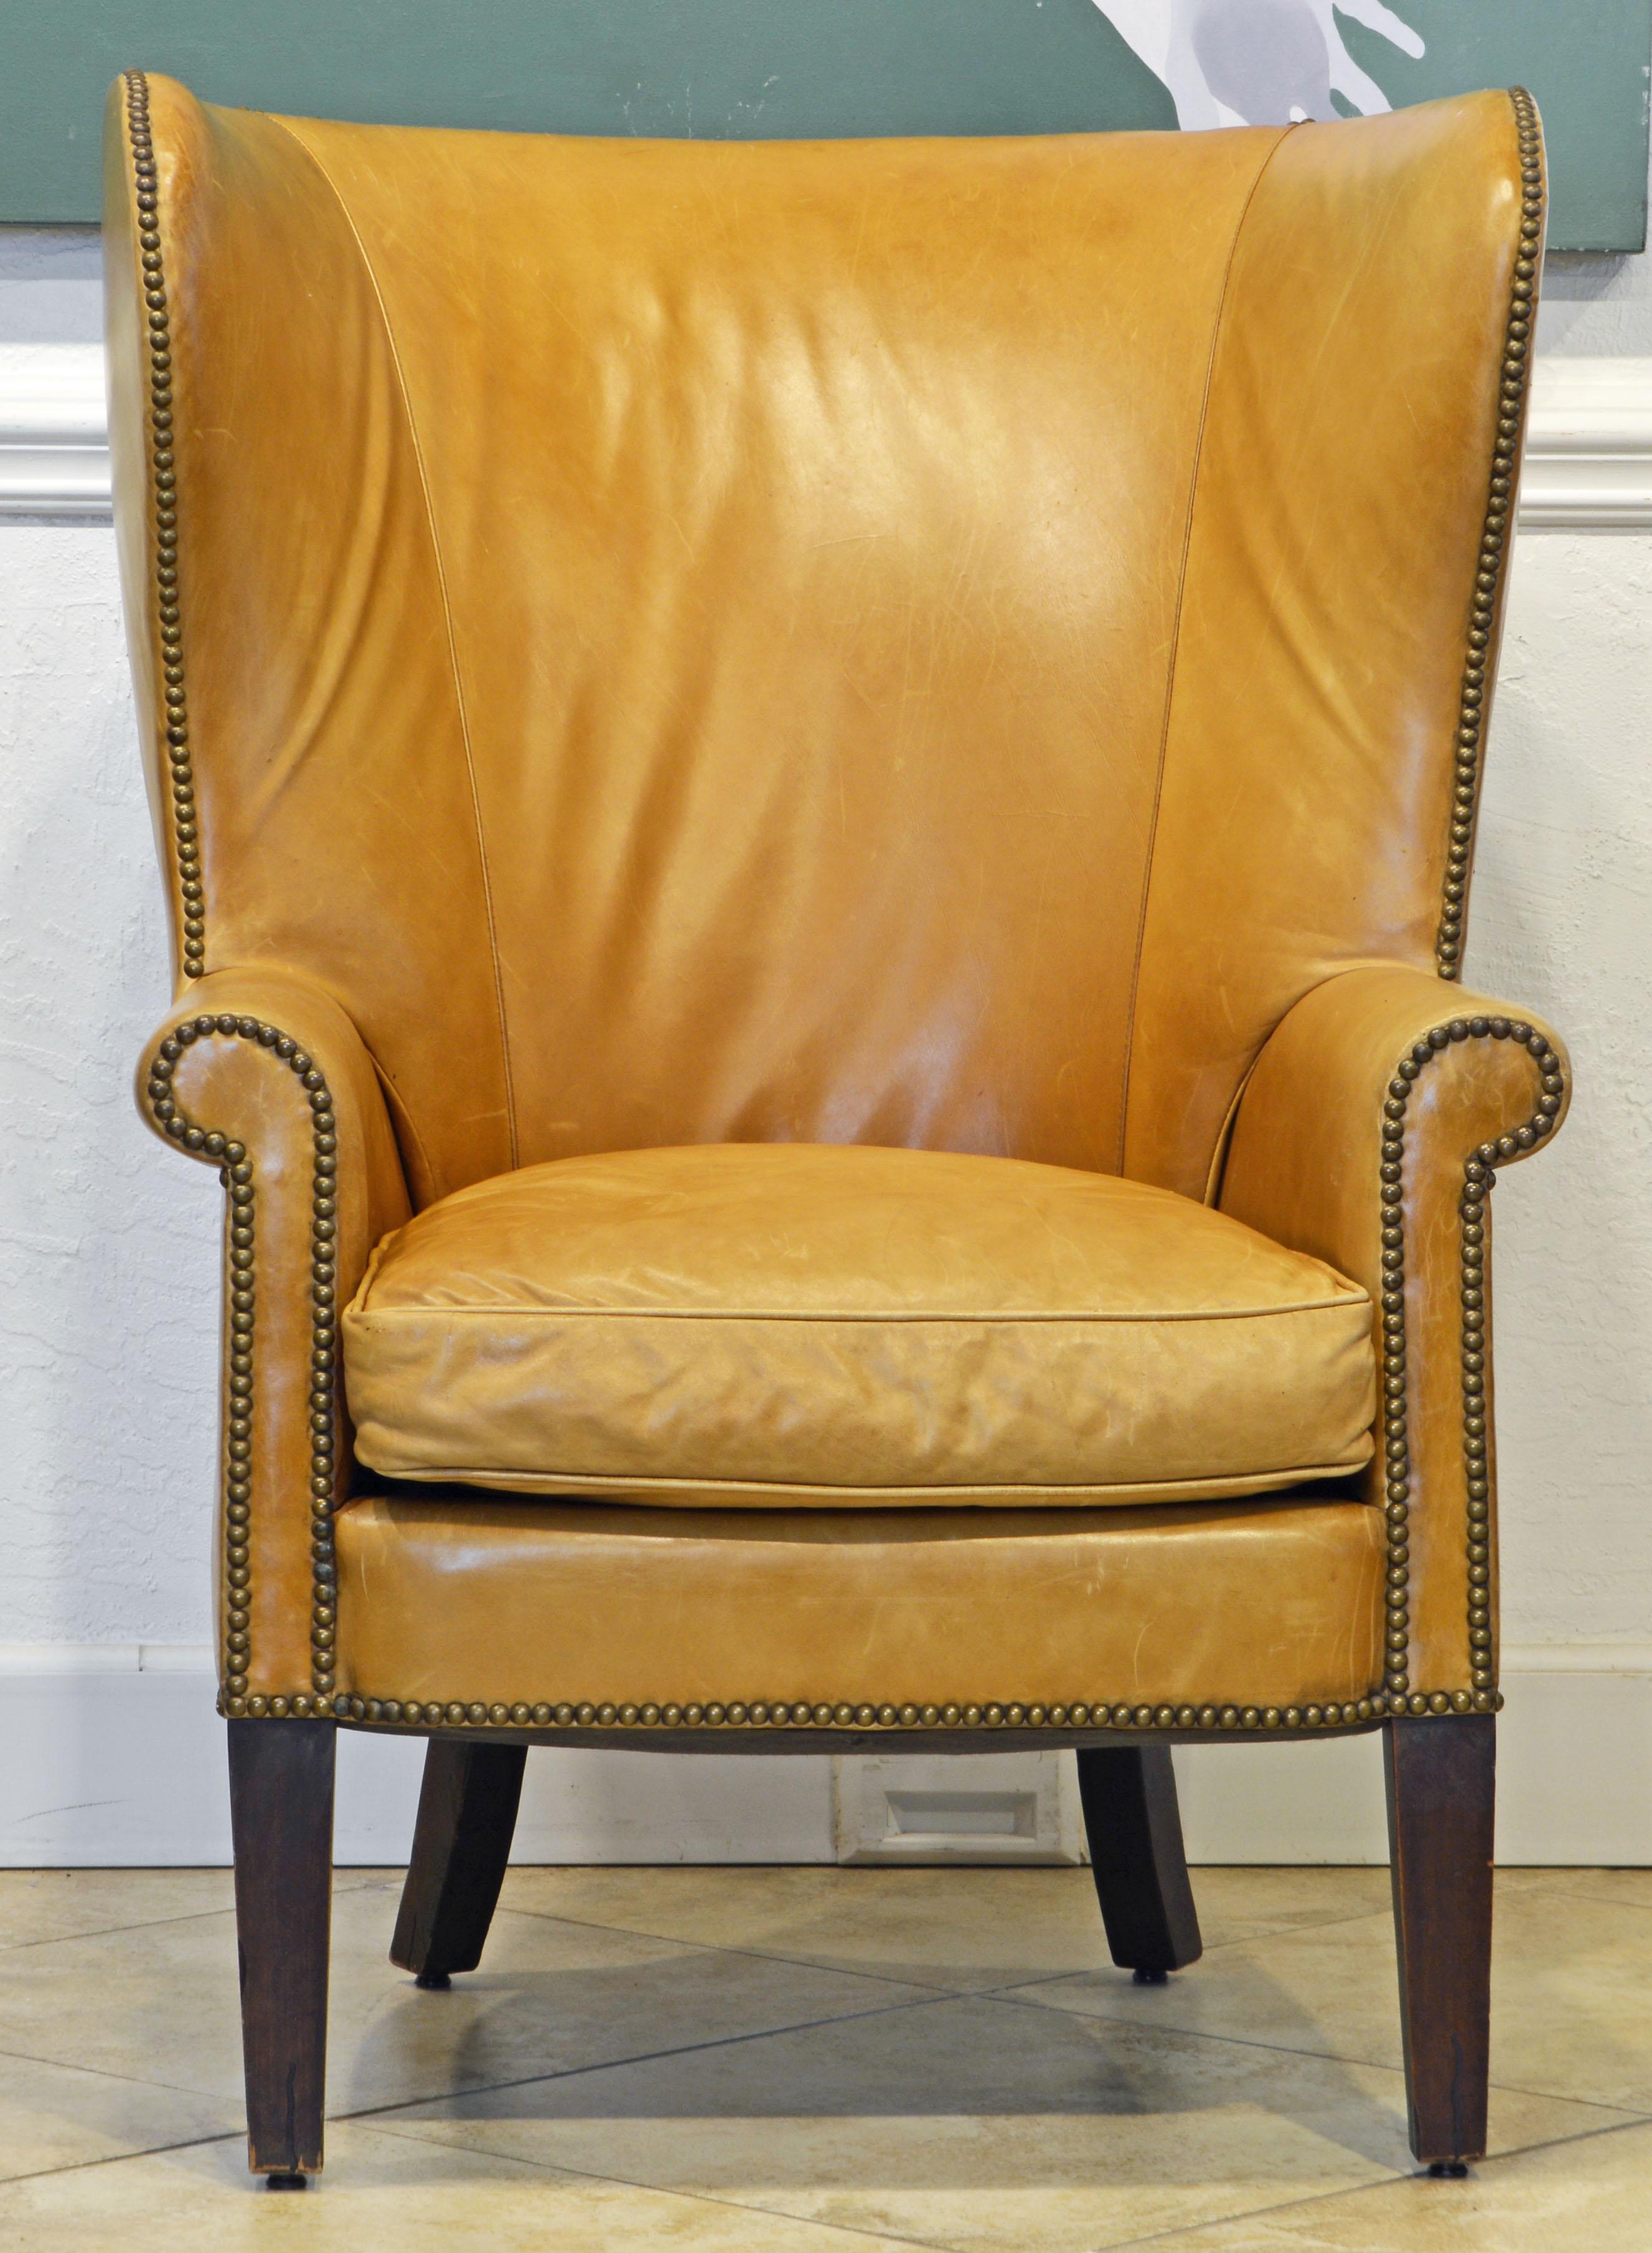 This sculptural wing back chair feature tanned leather cover trimmed with brass nail heads. It is a comfortable and inviting chair that will add an English country house flair to an interior.